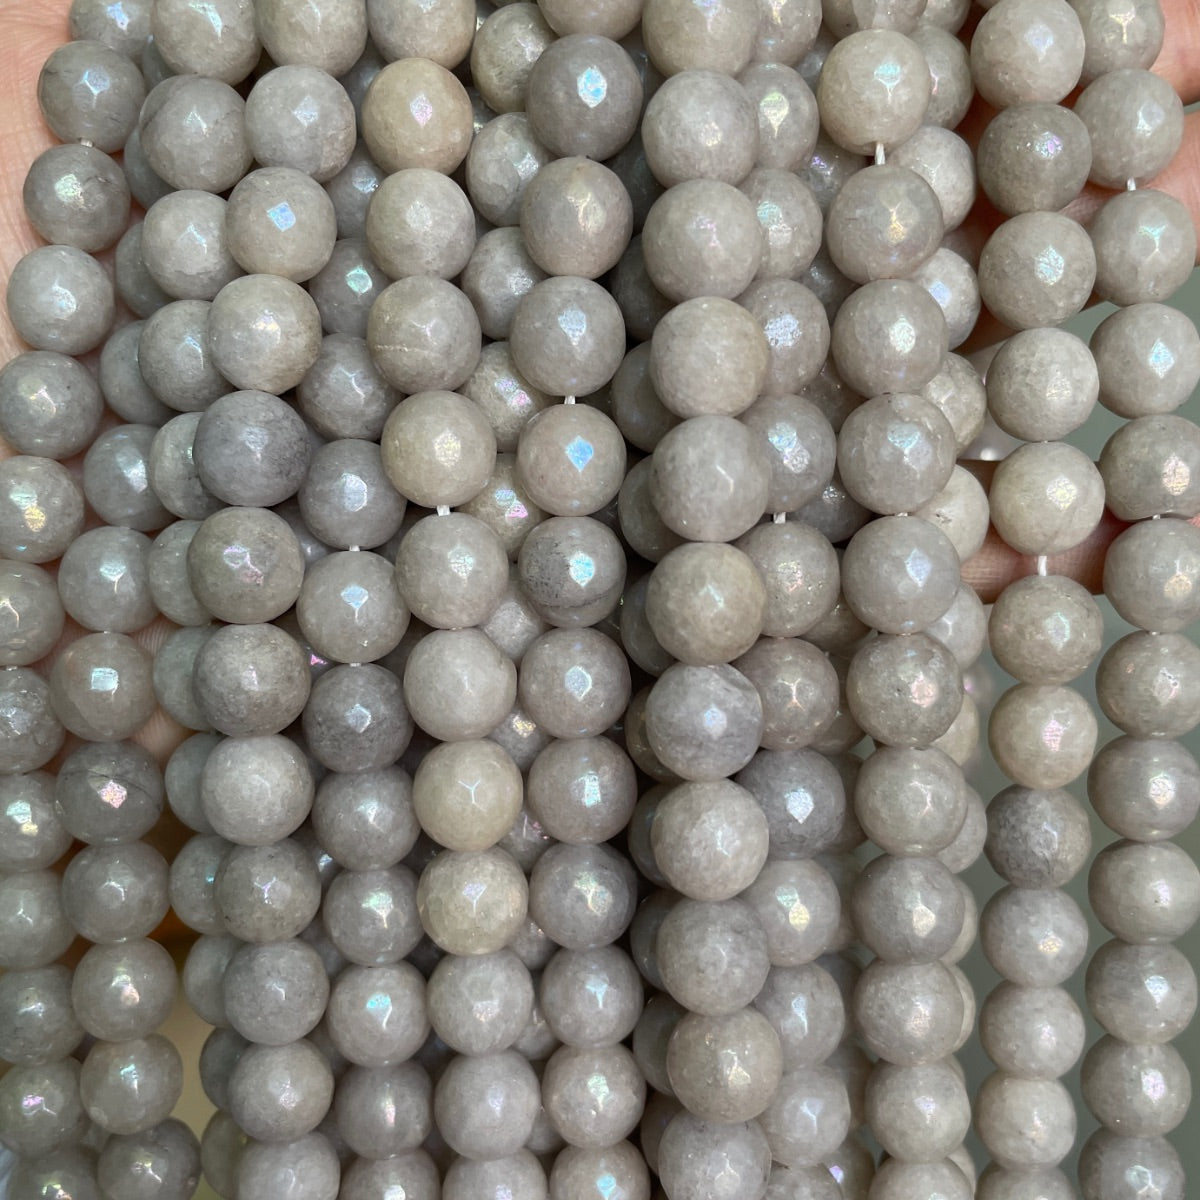 2 strands/lot 10mm Electroplated AB Light Gray Faceted Jade Stone Beads Electroplated Beads Electroplated Faceted Jade Beads New Beads Arrivals Charms Beads Beyond